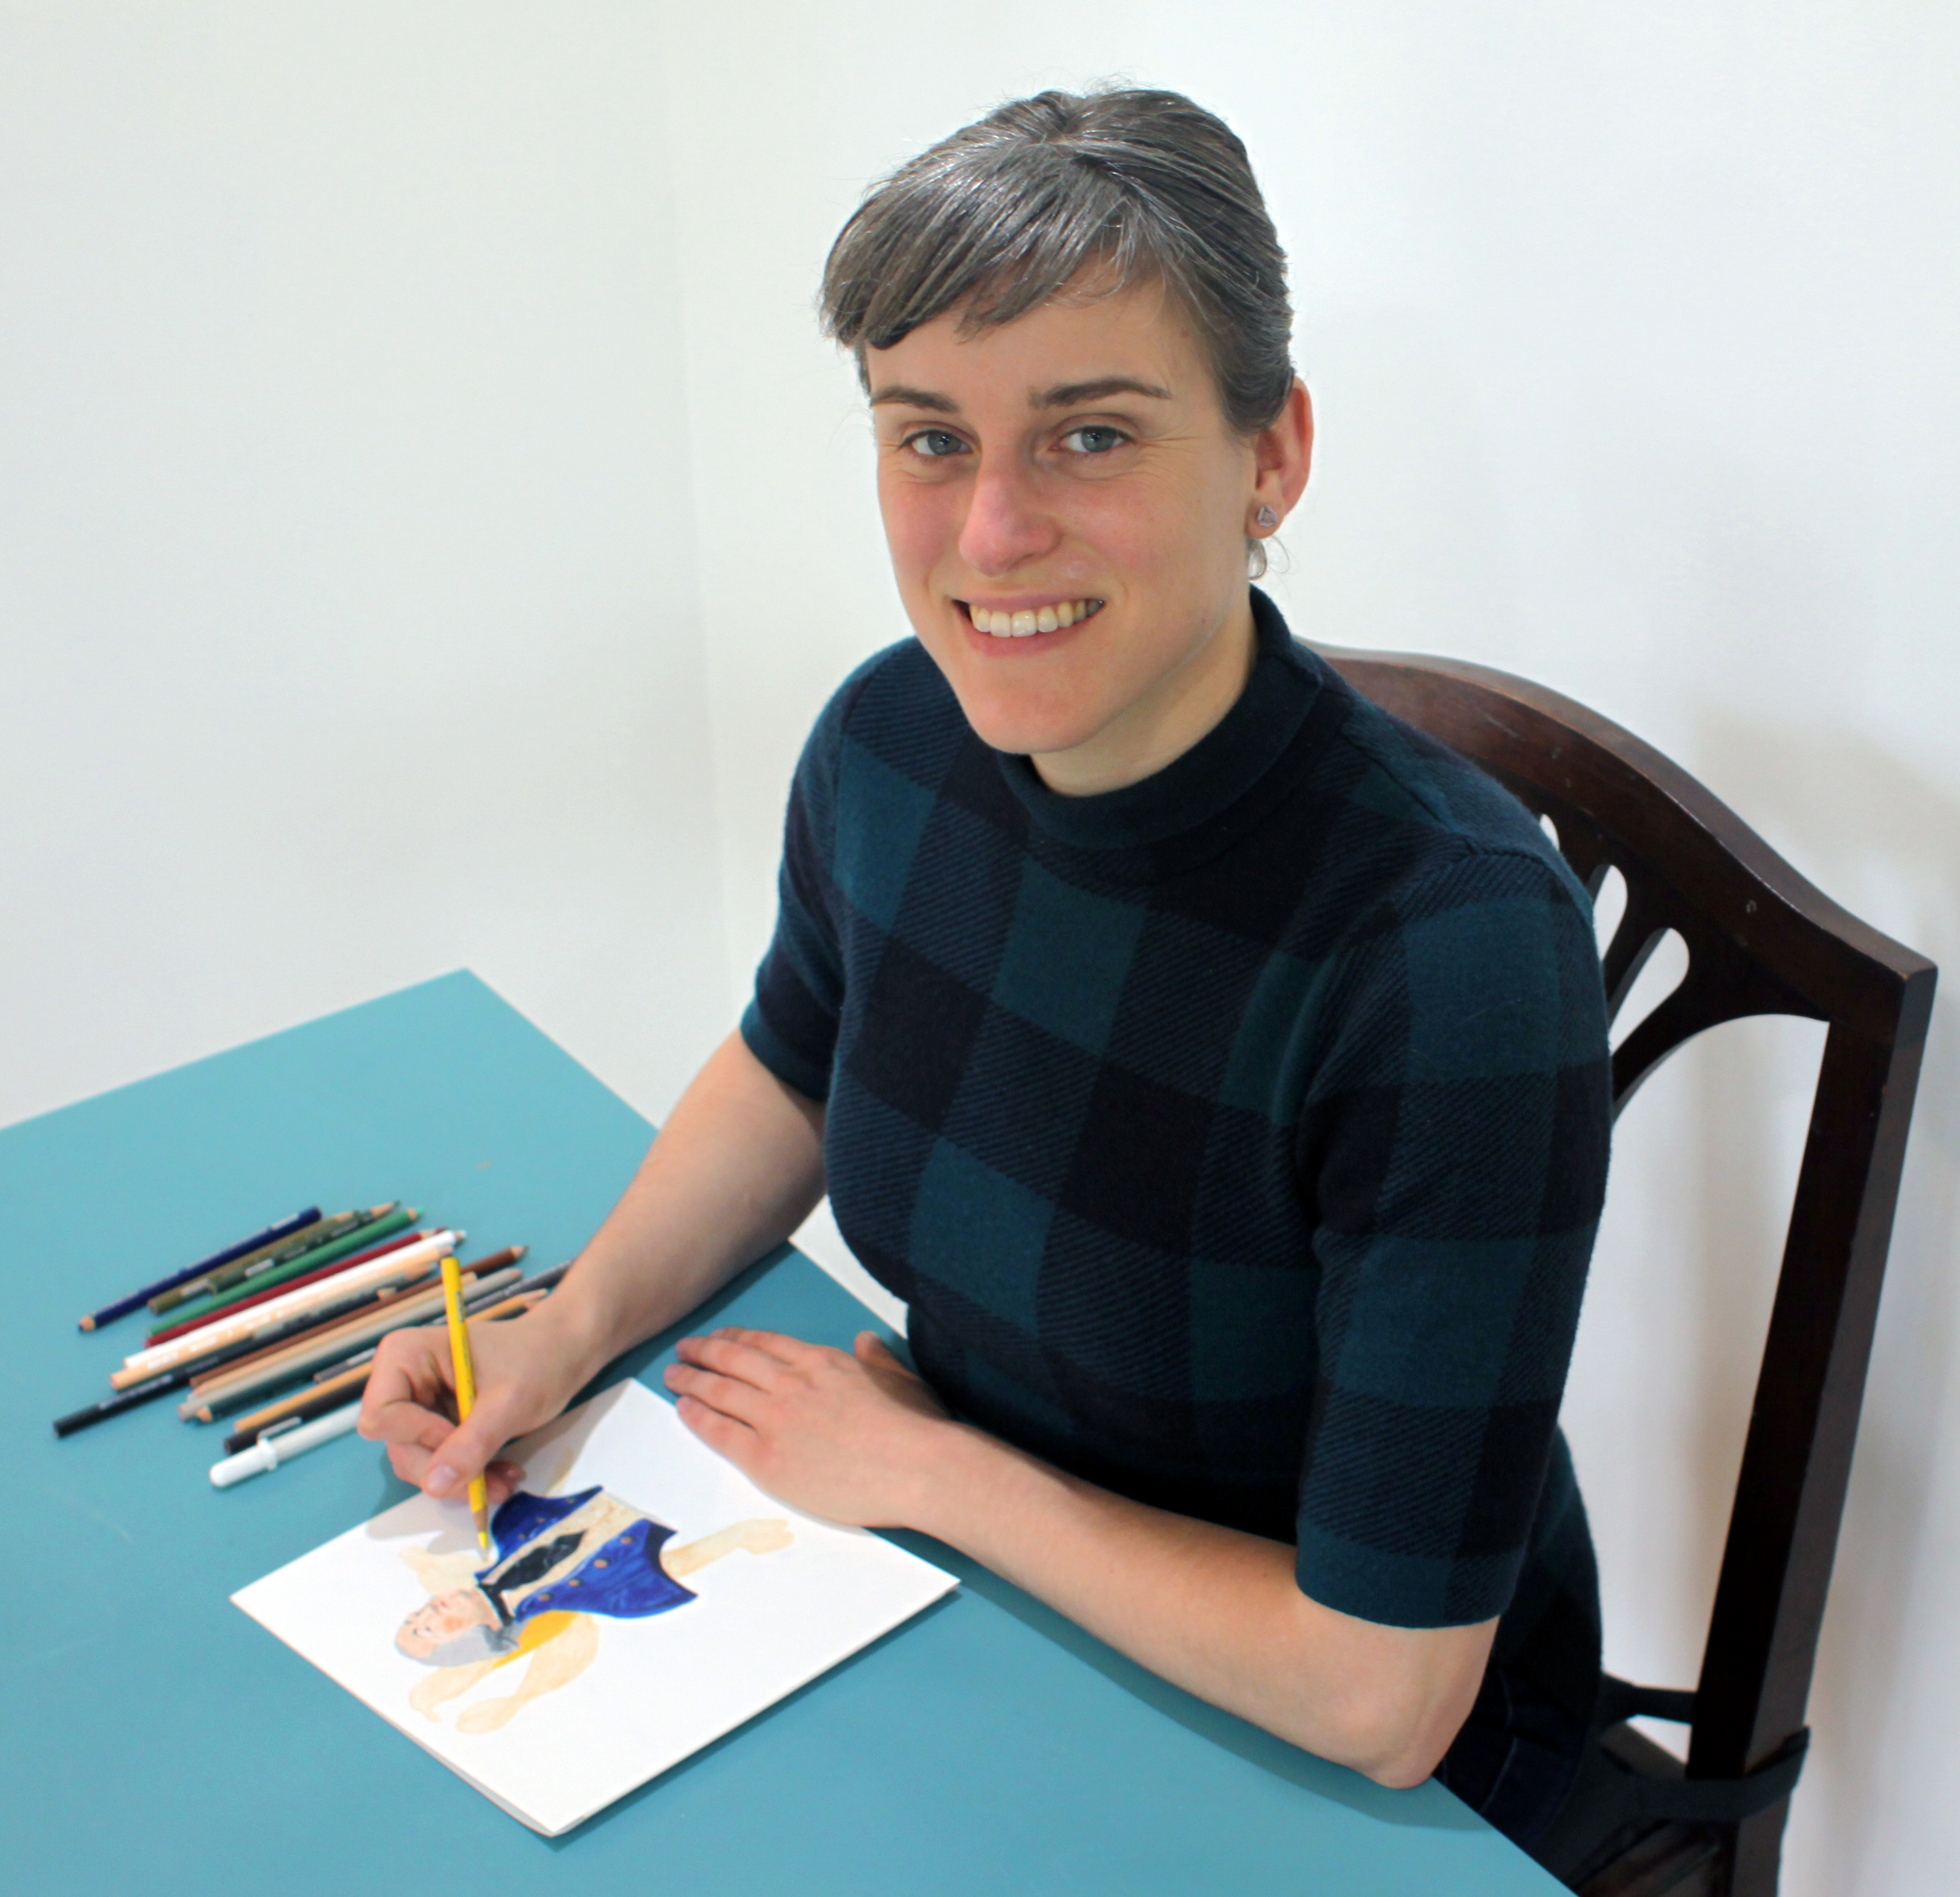 A smiling woman looks up from a color pencil drawing.